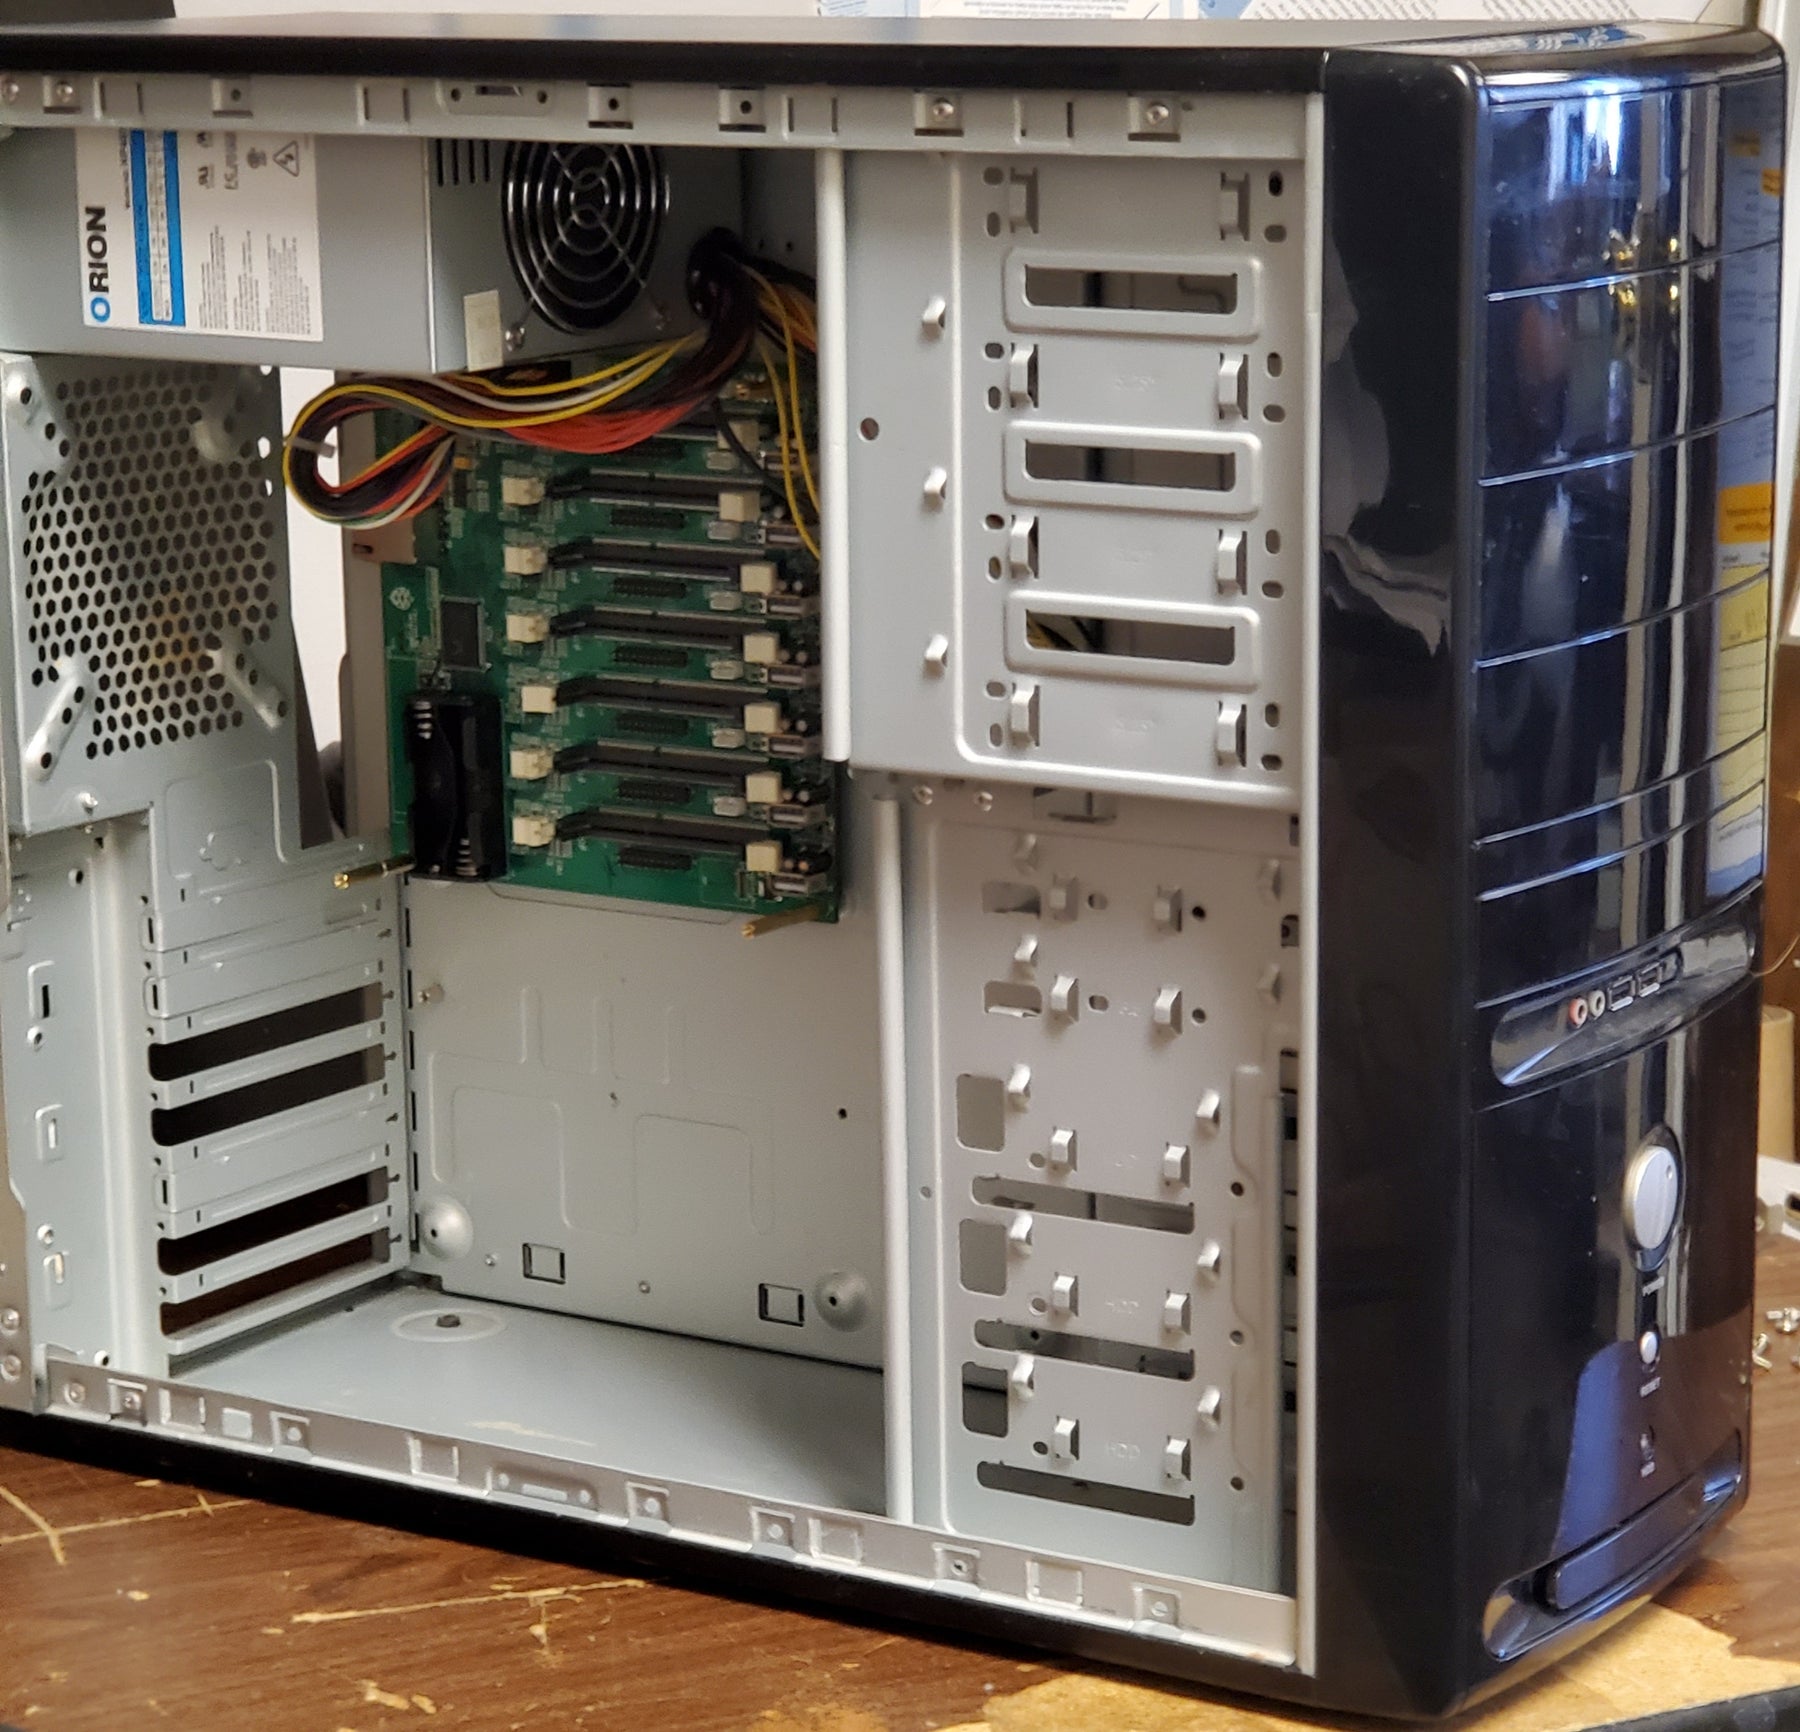 Project: Mounting Clusterboard in an ATX Mini Tower